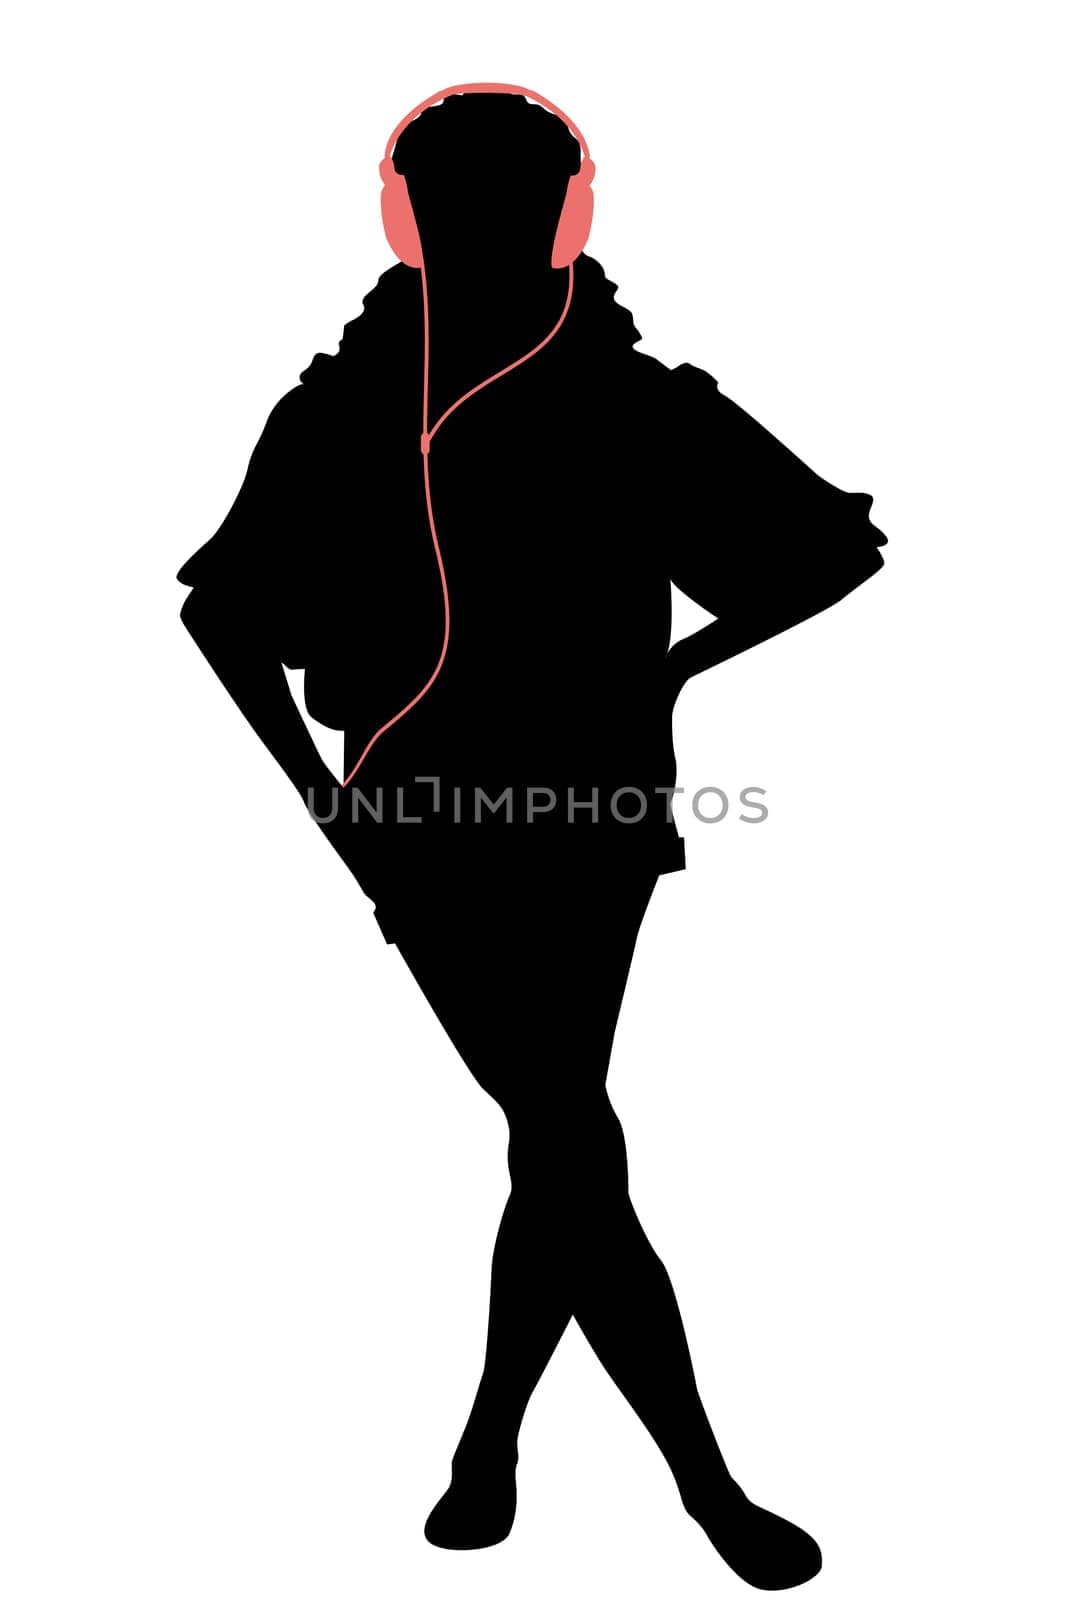 Silhouette of a woman listening to music with headphones by hibrida13